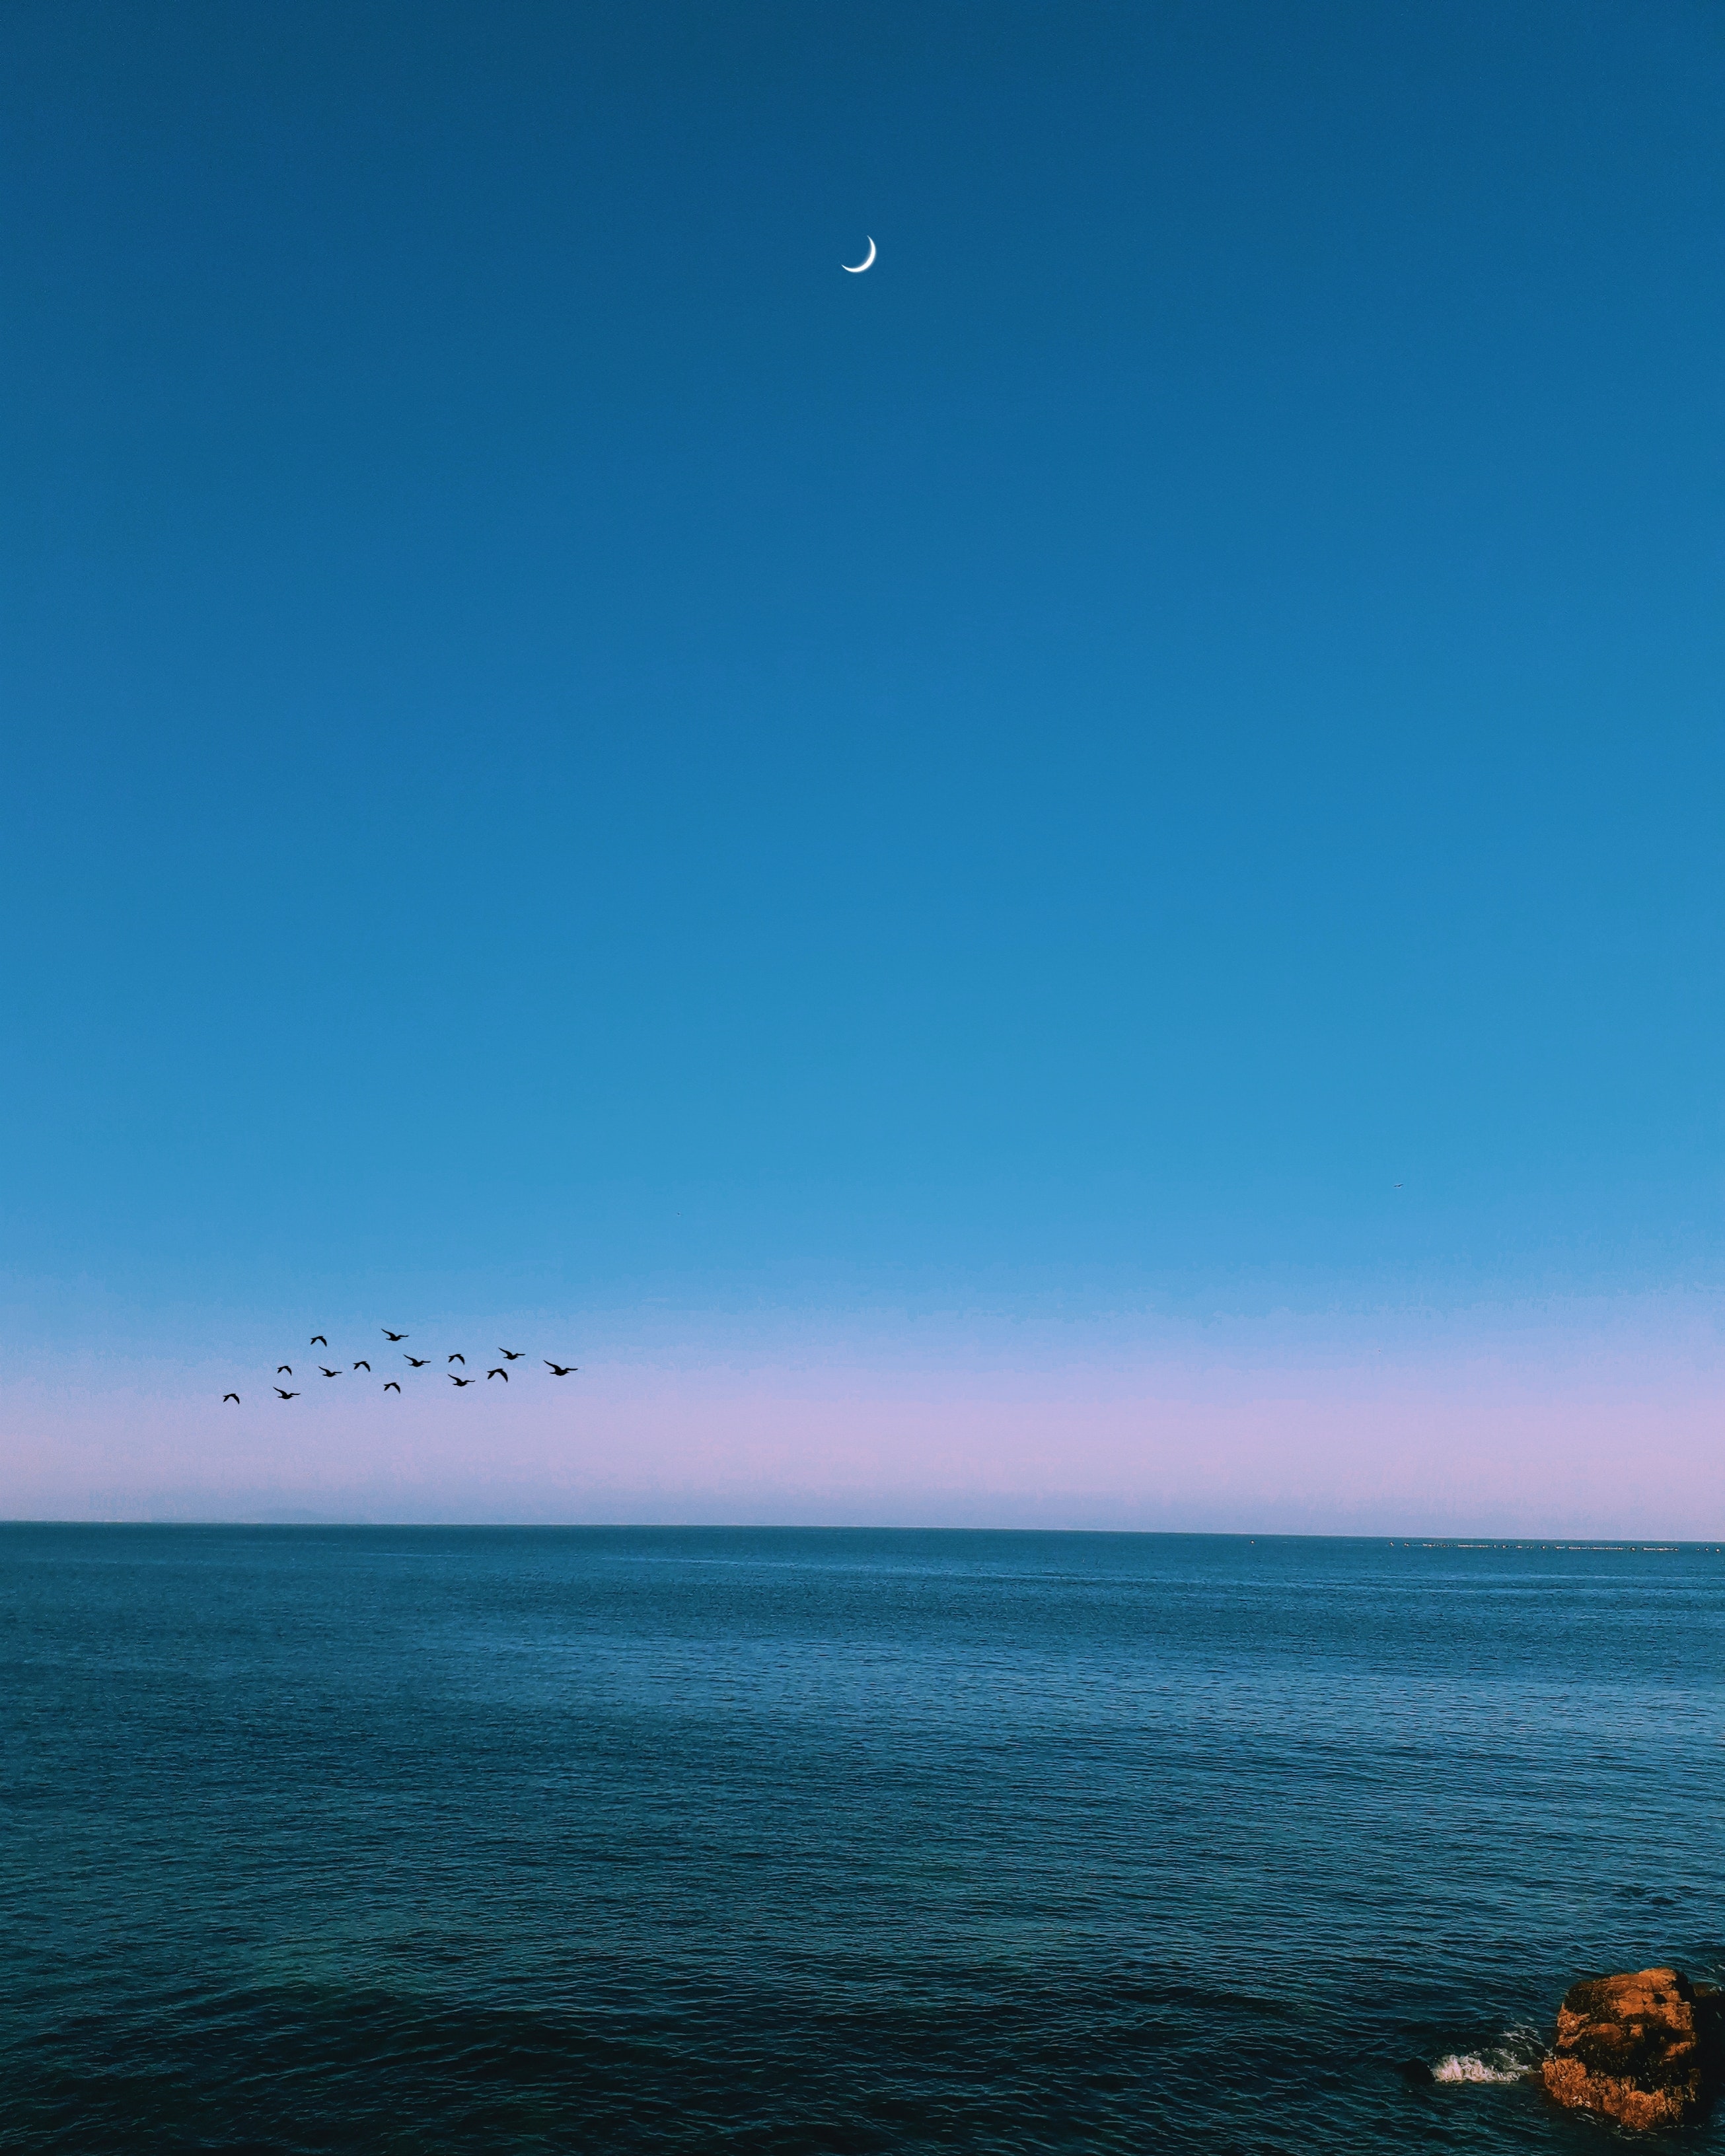 A flock of birds flying over the ocean under a blue sky with a sliver of a moon. - Calming